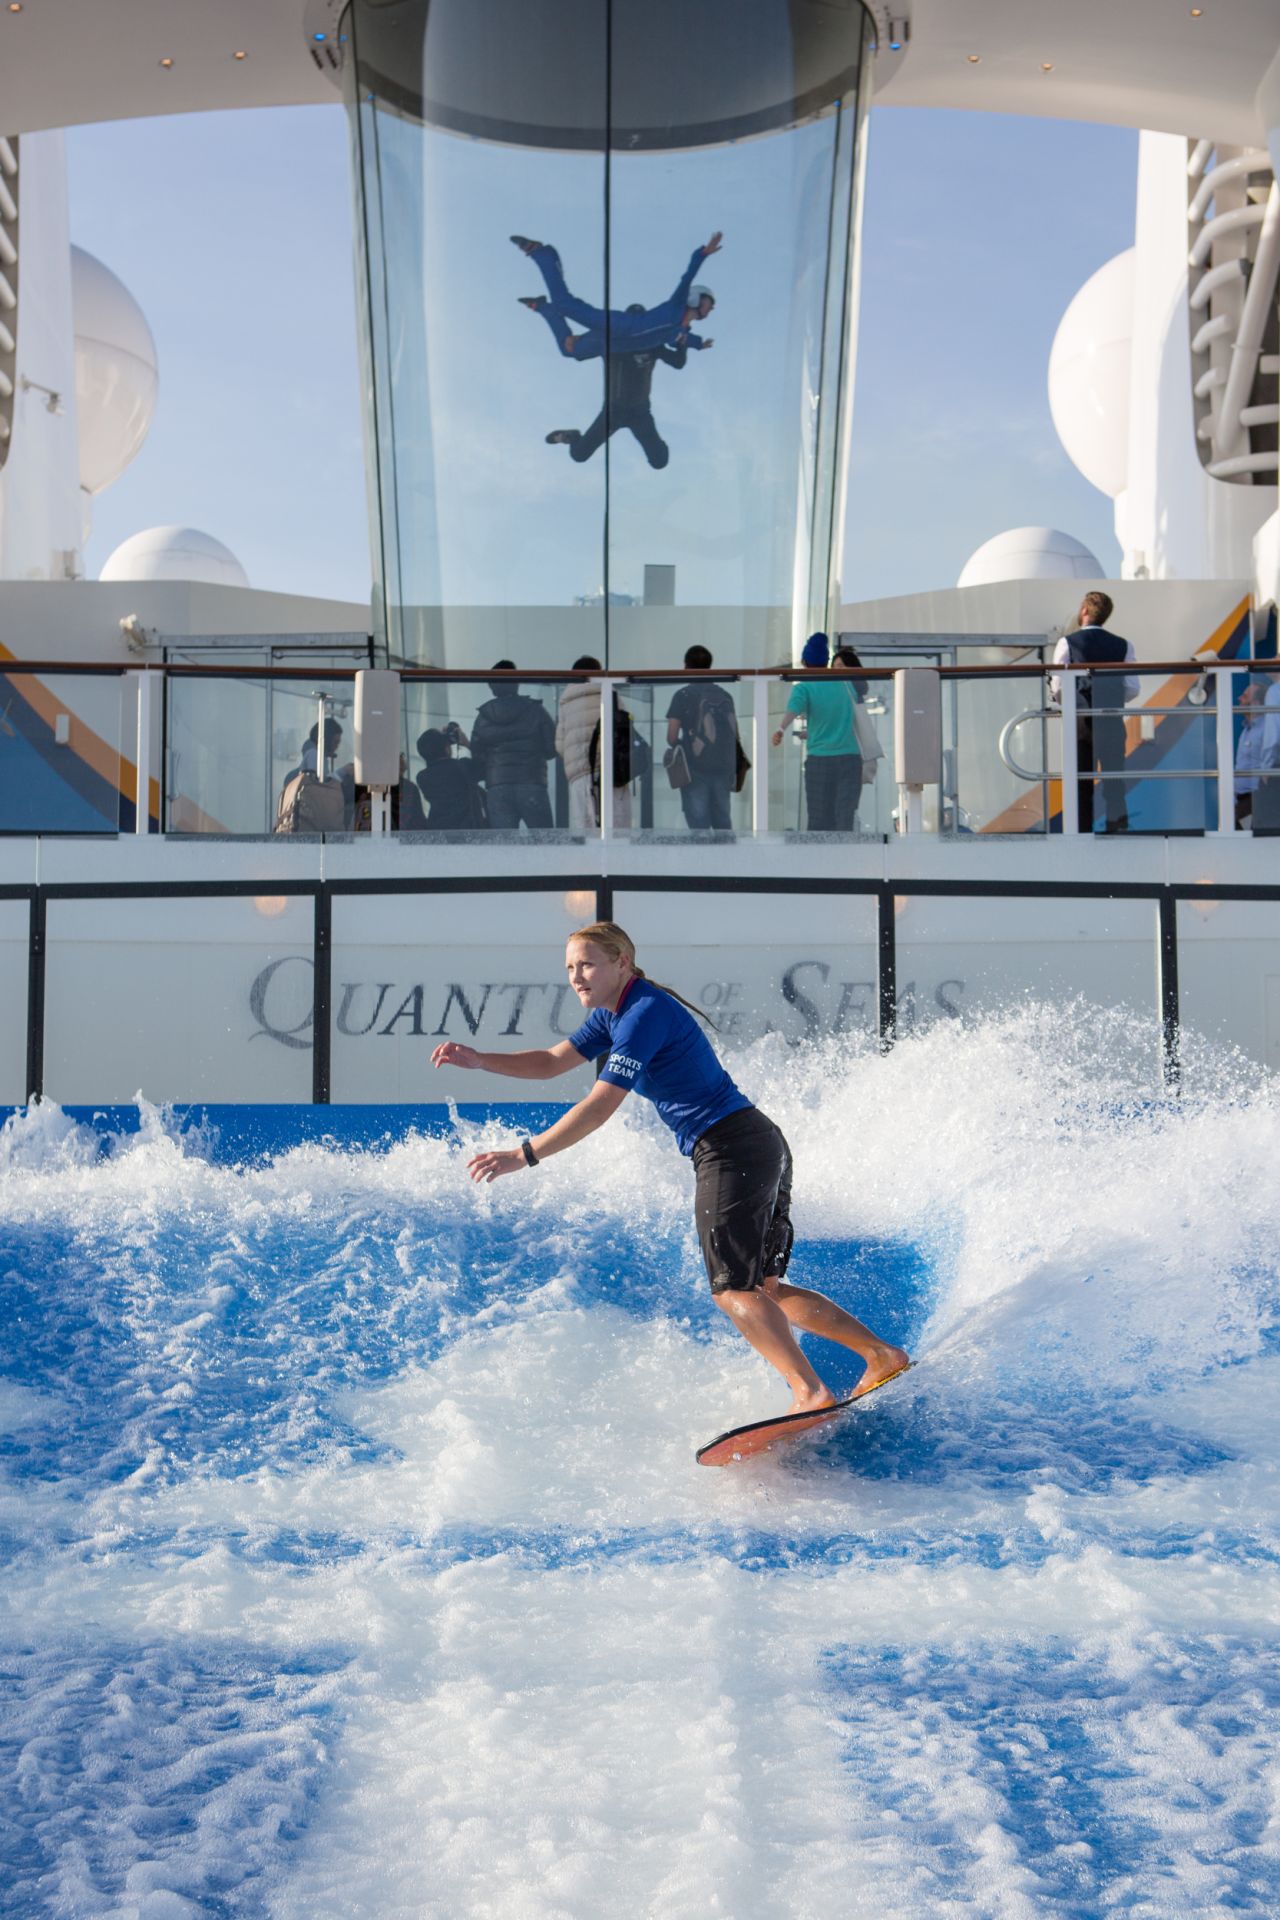 And for those with a more water-based interest, a surf simulator gives people the perfect opportunity to practice their skills in the waves.